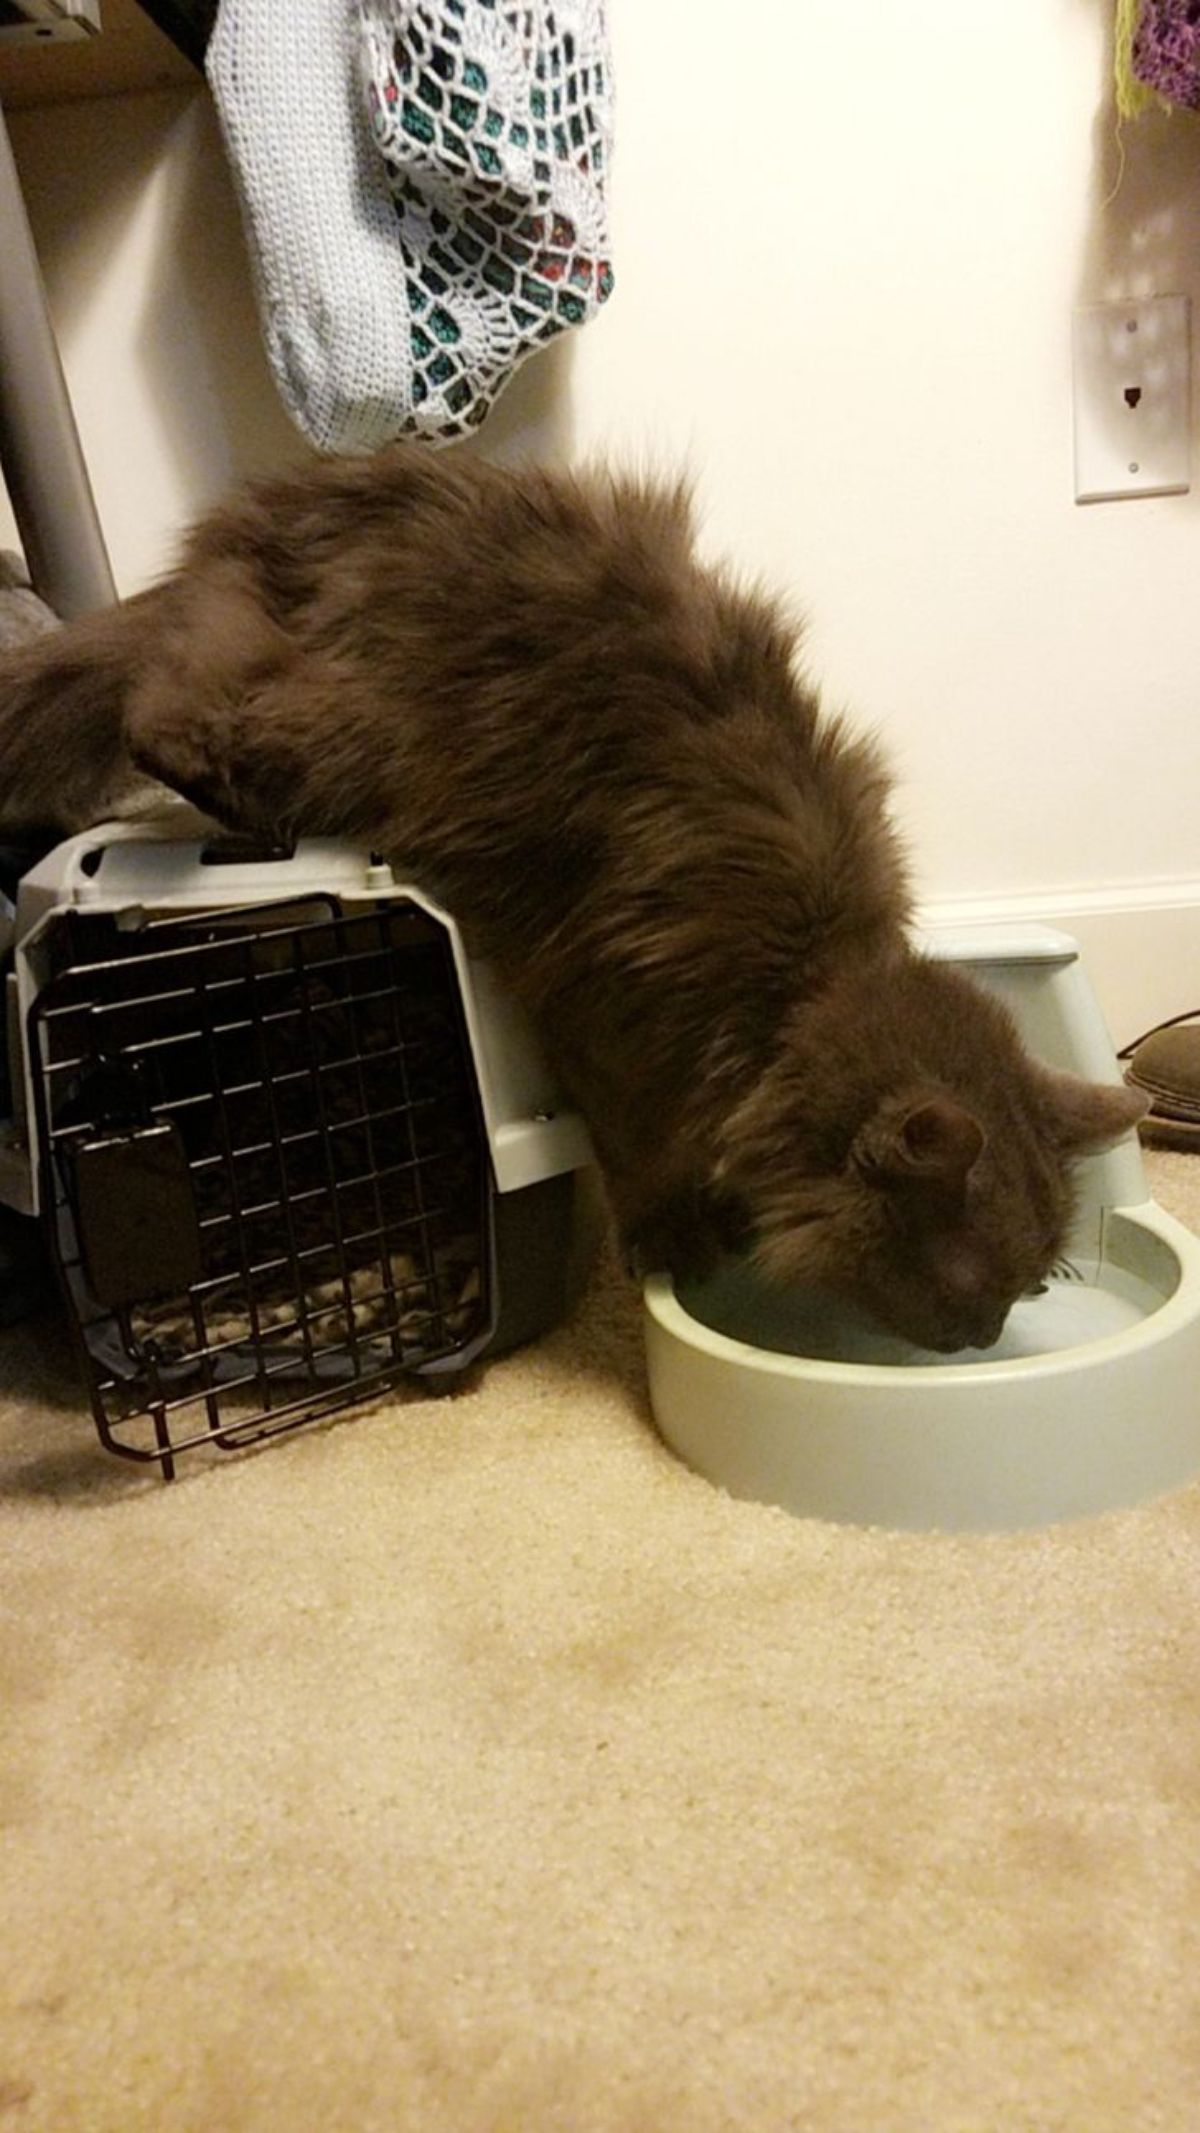 fluffy dark brown cat drinking water out of a bowl on the floor with the back legs on the top of a carrier